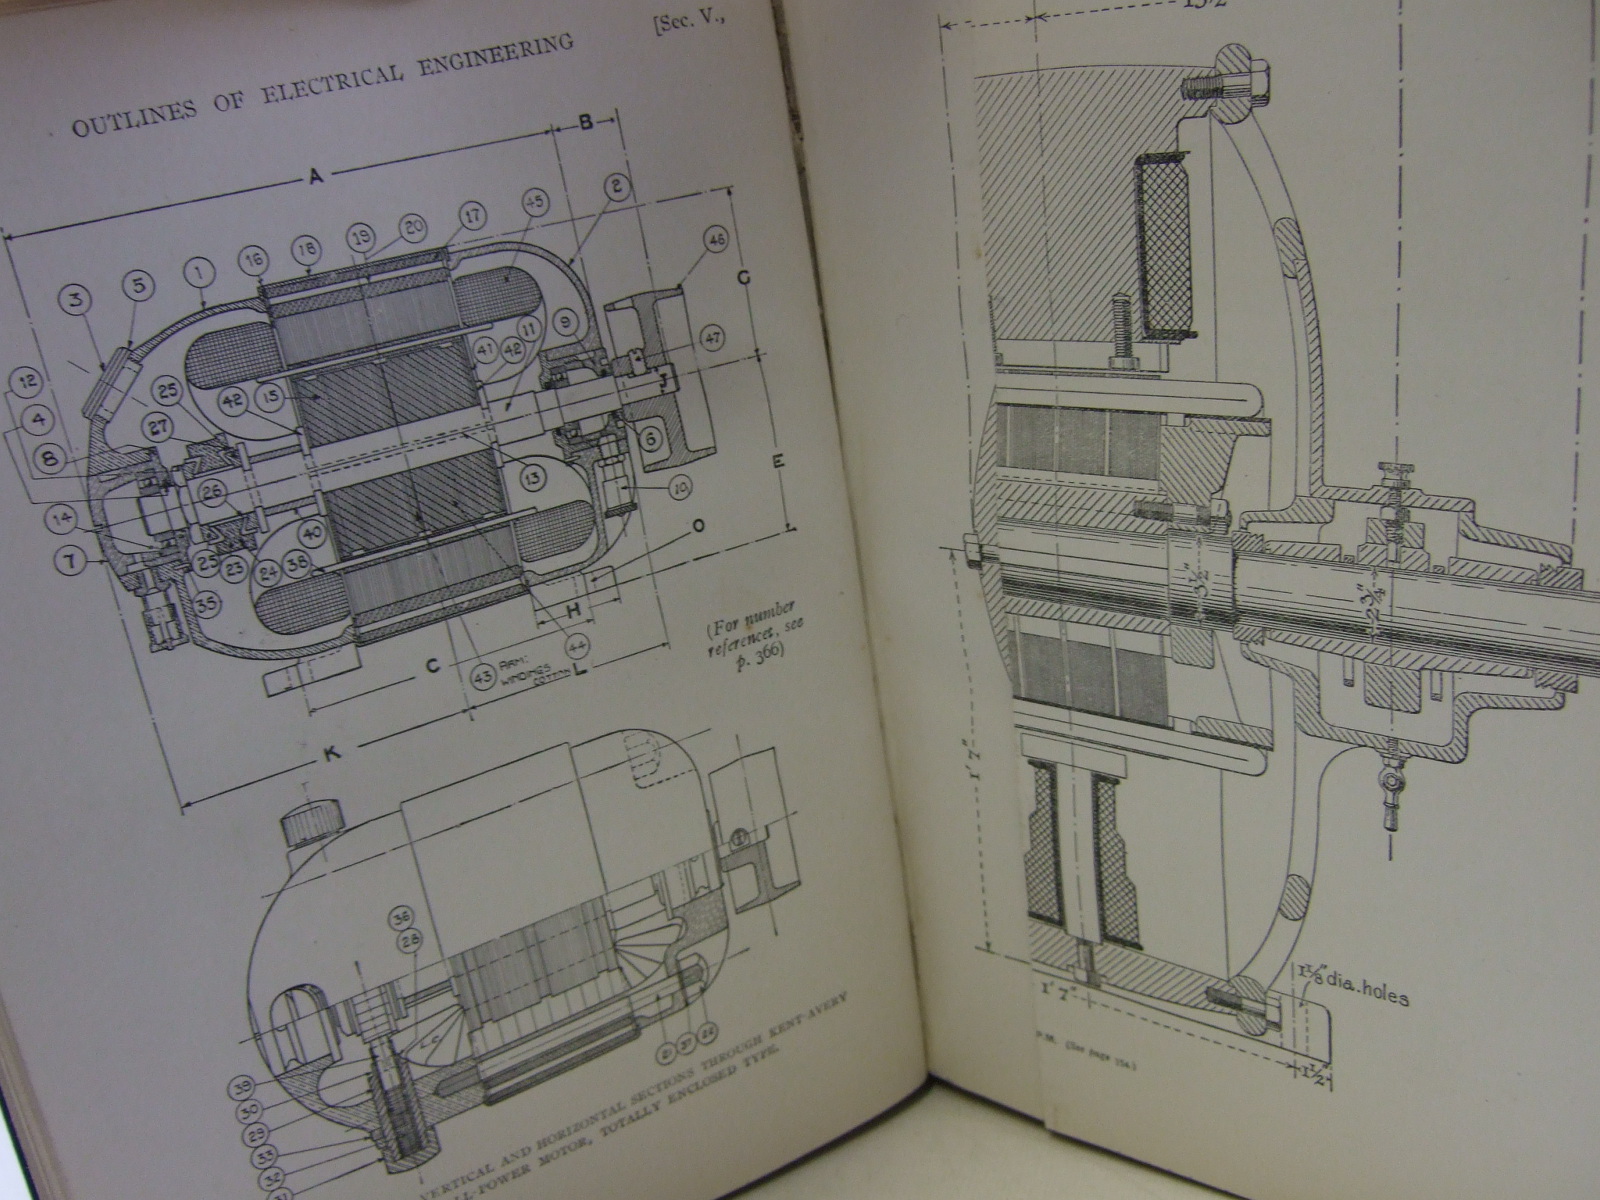 Photo of ELECTRICAL ENGINEERING (3 VOLUMES) written by Simmons, Harold H.
Avery, Alfred H. published by The Waverley Book Company Ltd. (STOCK CODE: 1806579)  for sale by Stella & Rose's Books